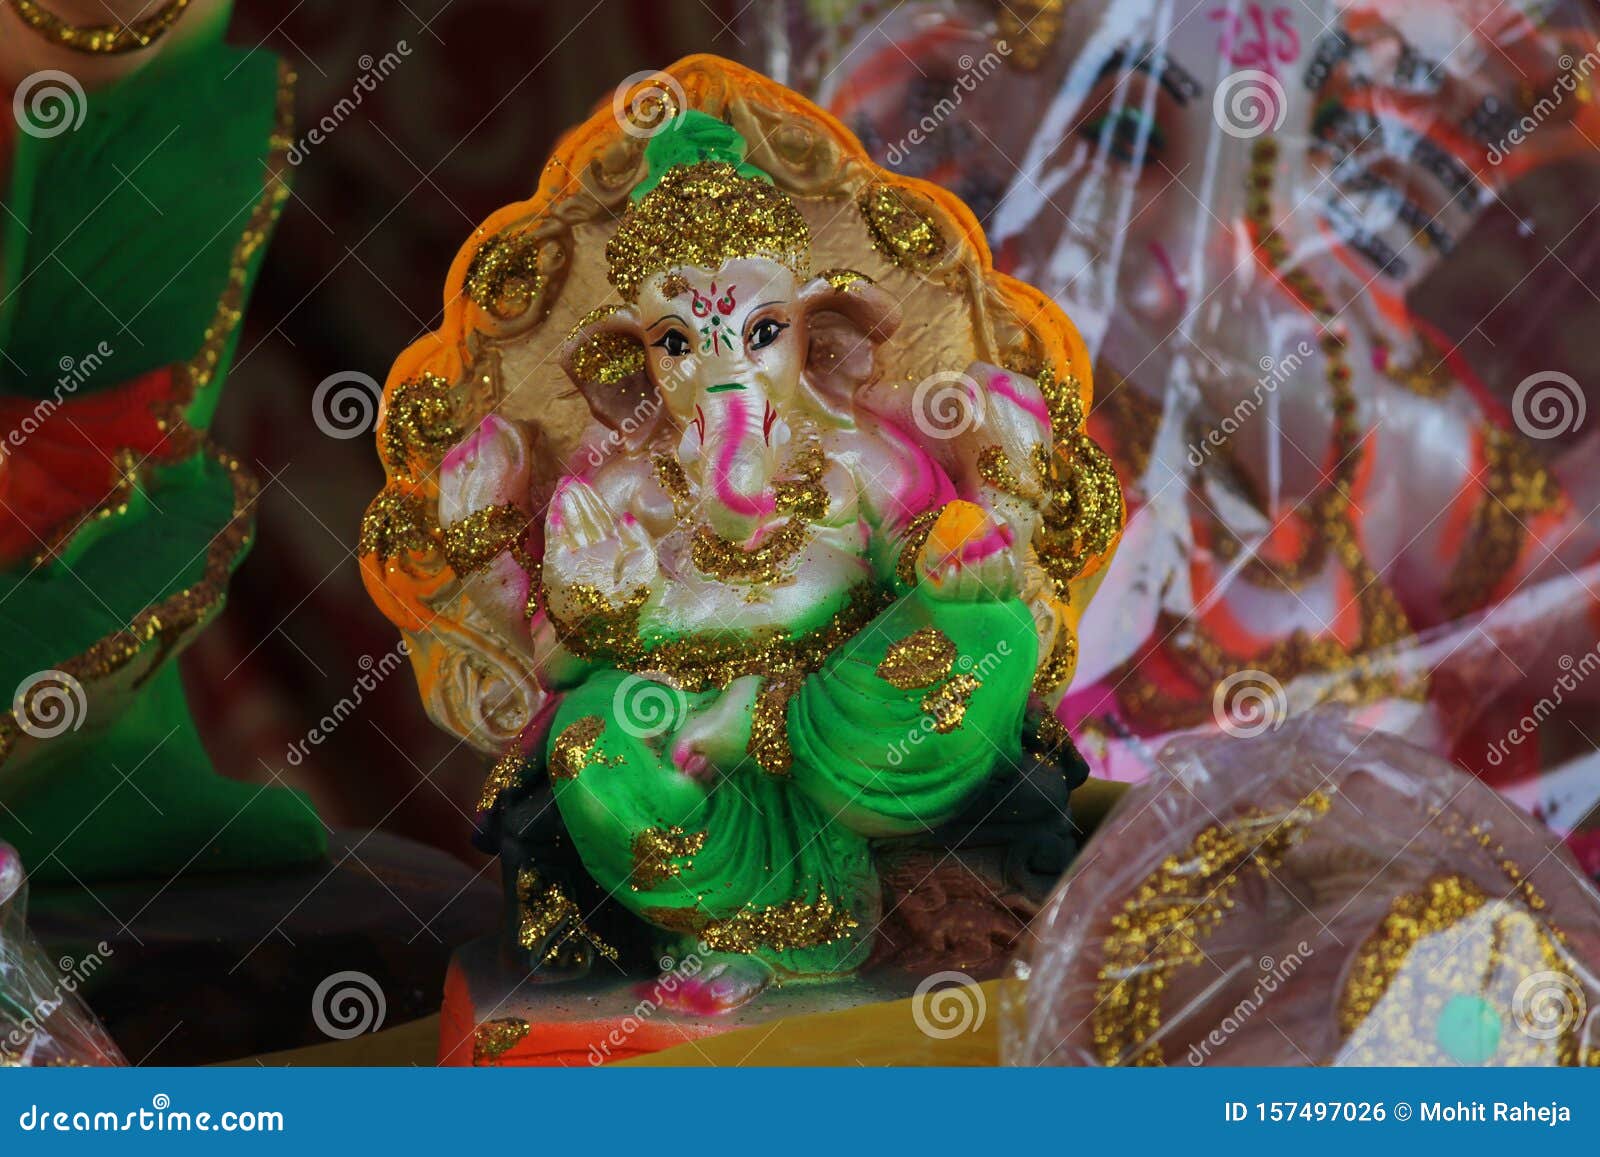 A Beautiful Clay Statue/Idol of an Indian God Lord Ganesha Decorated ...